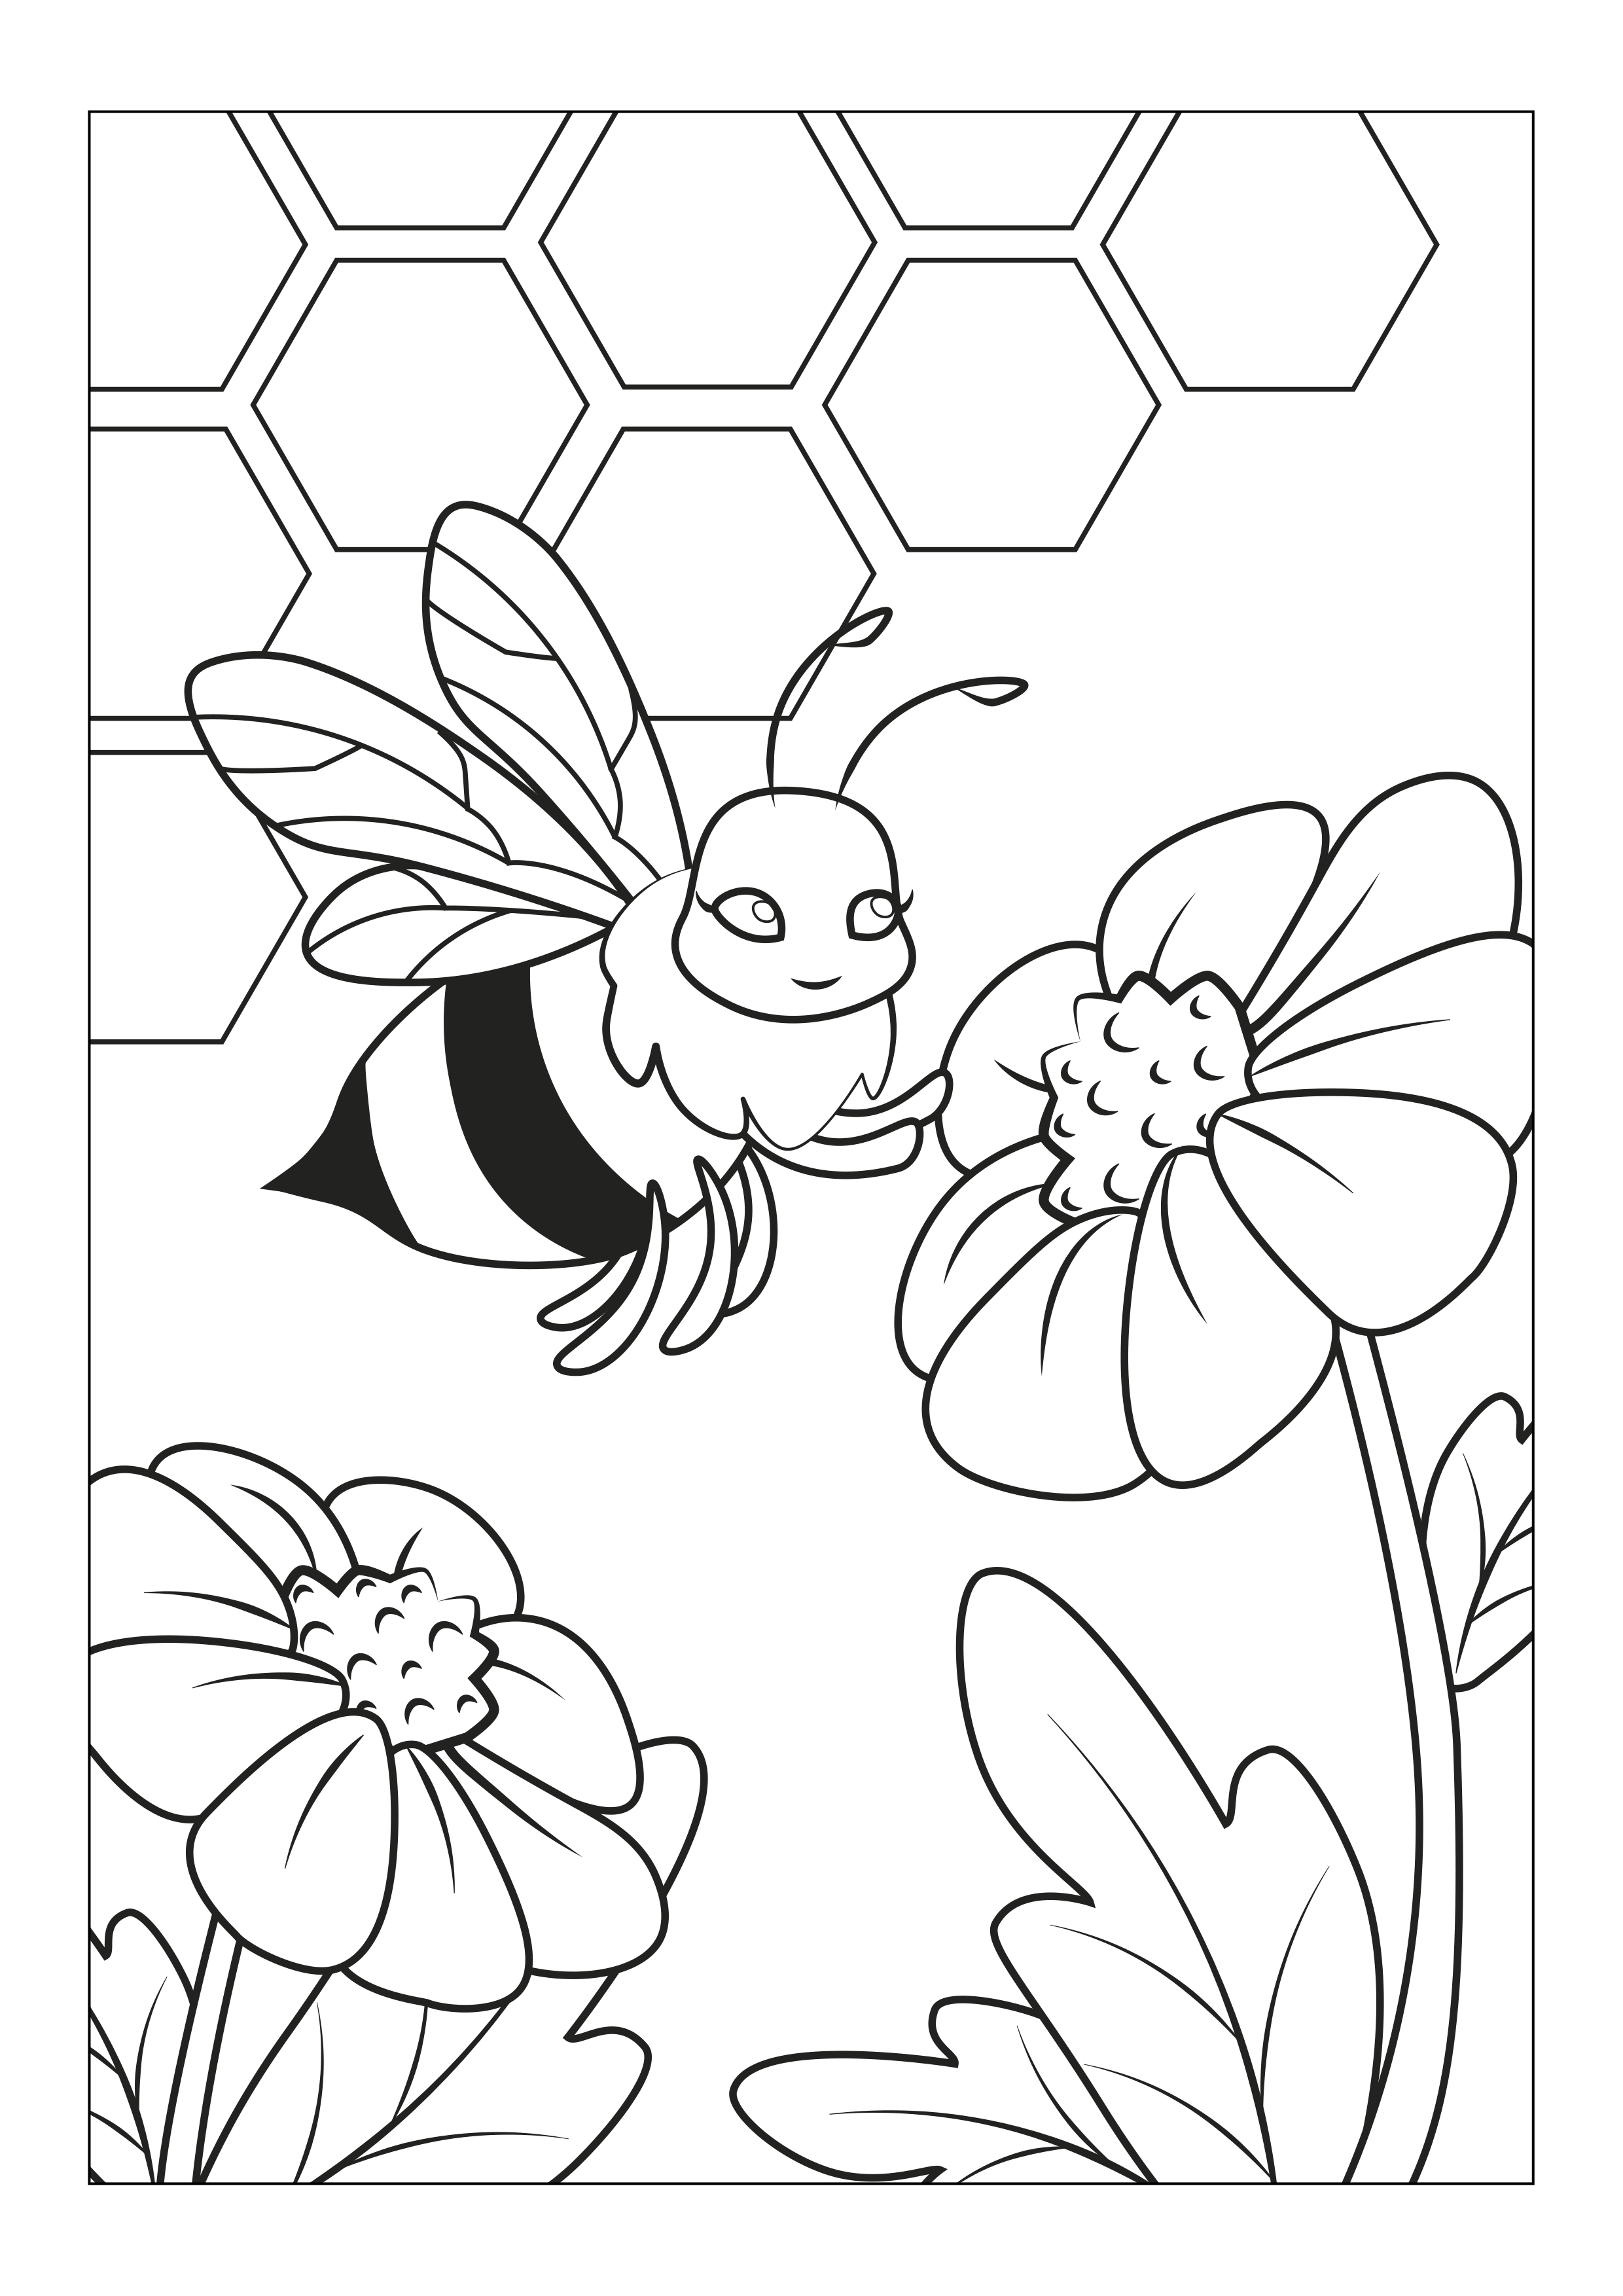 Free Online Coloring Pages With Super Cool Bugs - Best Online Gift Store